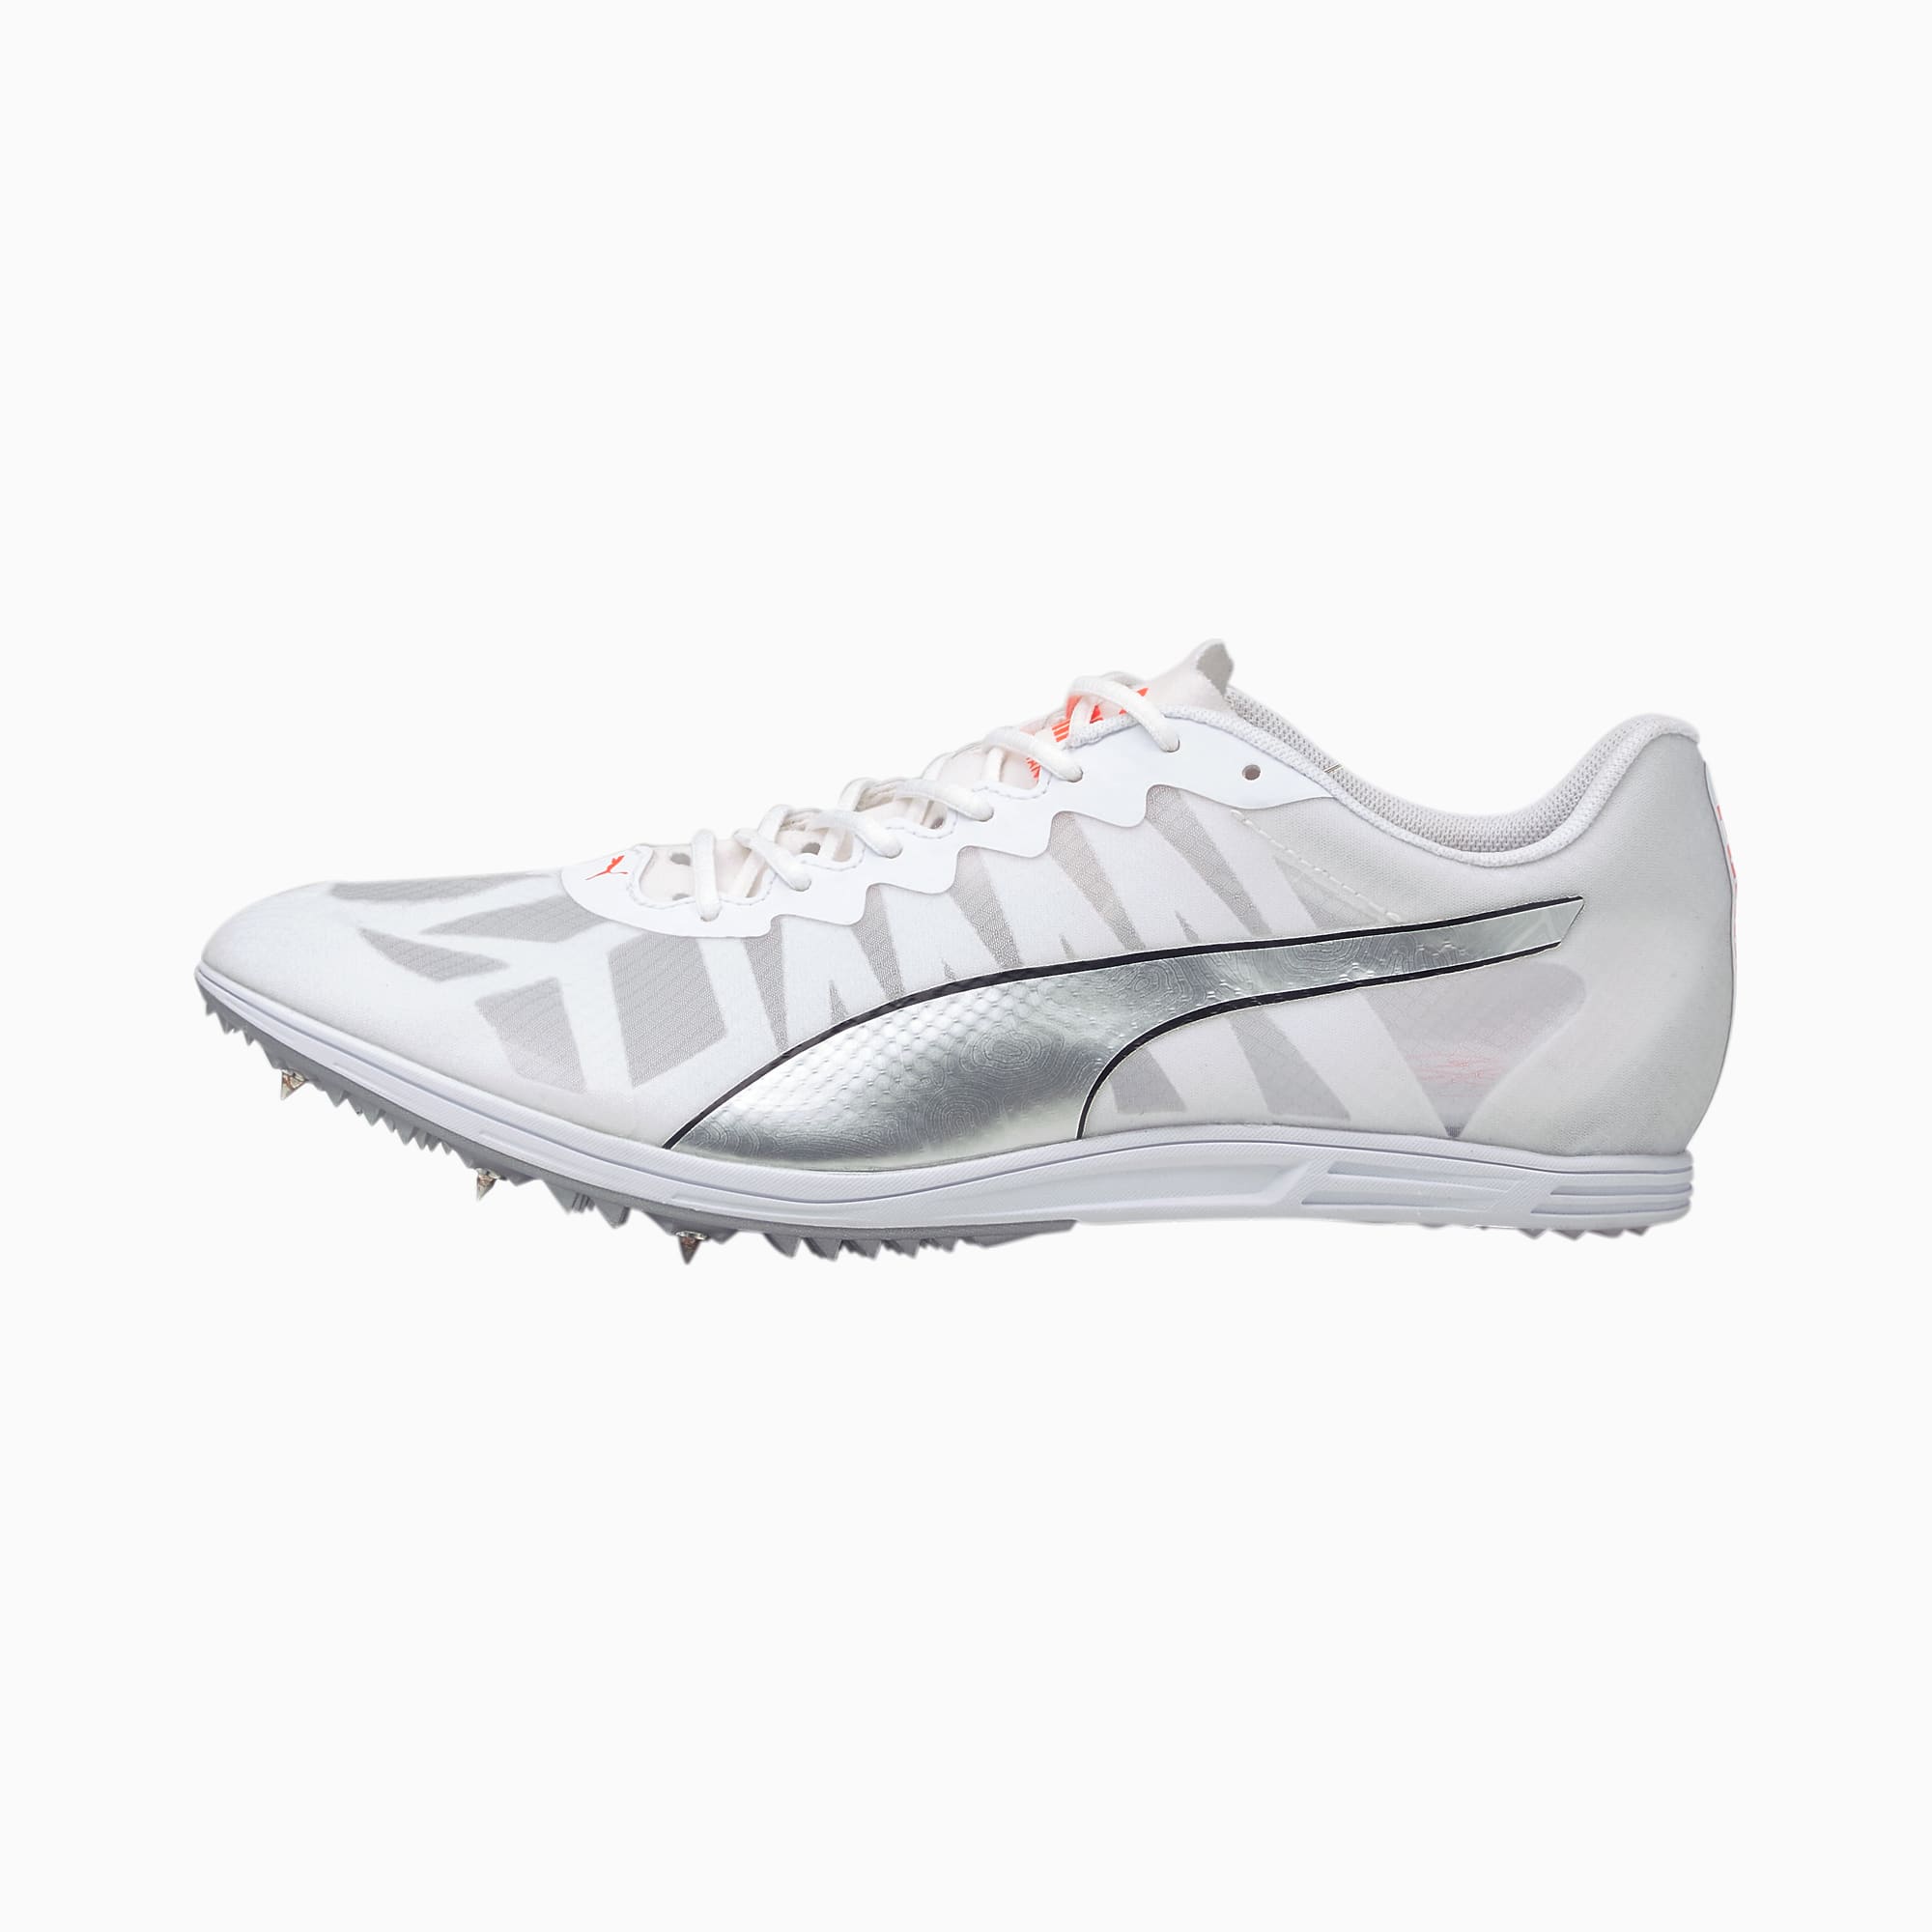 PUMA Chaussures d?athletisme a pointes evoSPEED Distance 9 homme, Blanc/Argent, Taille 40.5, Chaussures